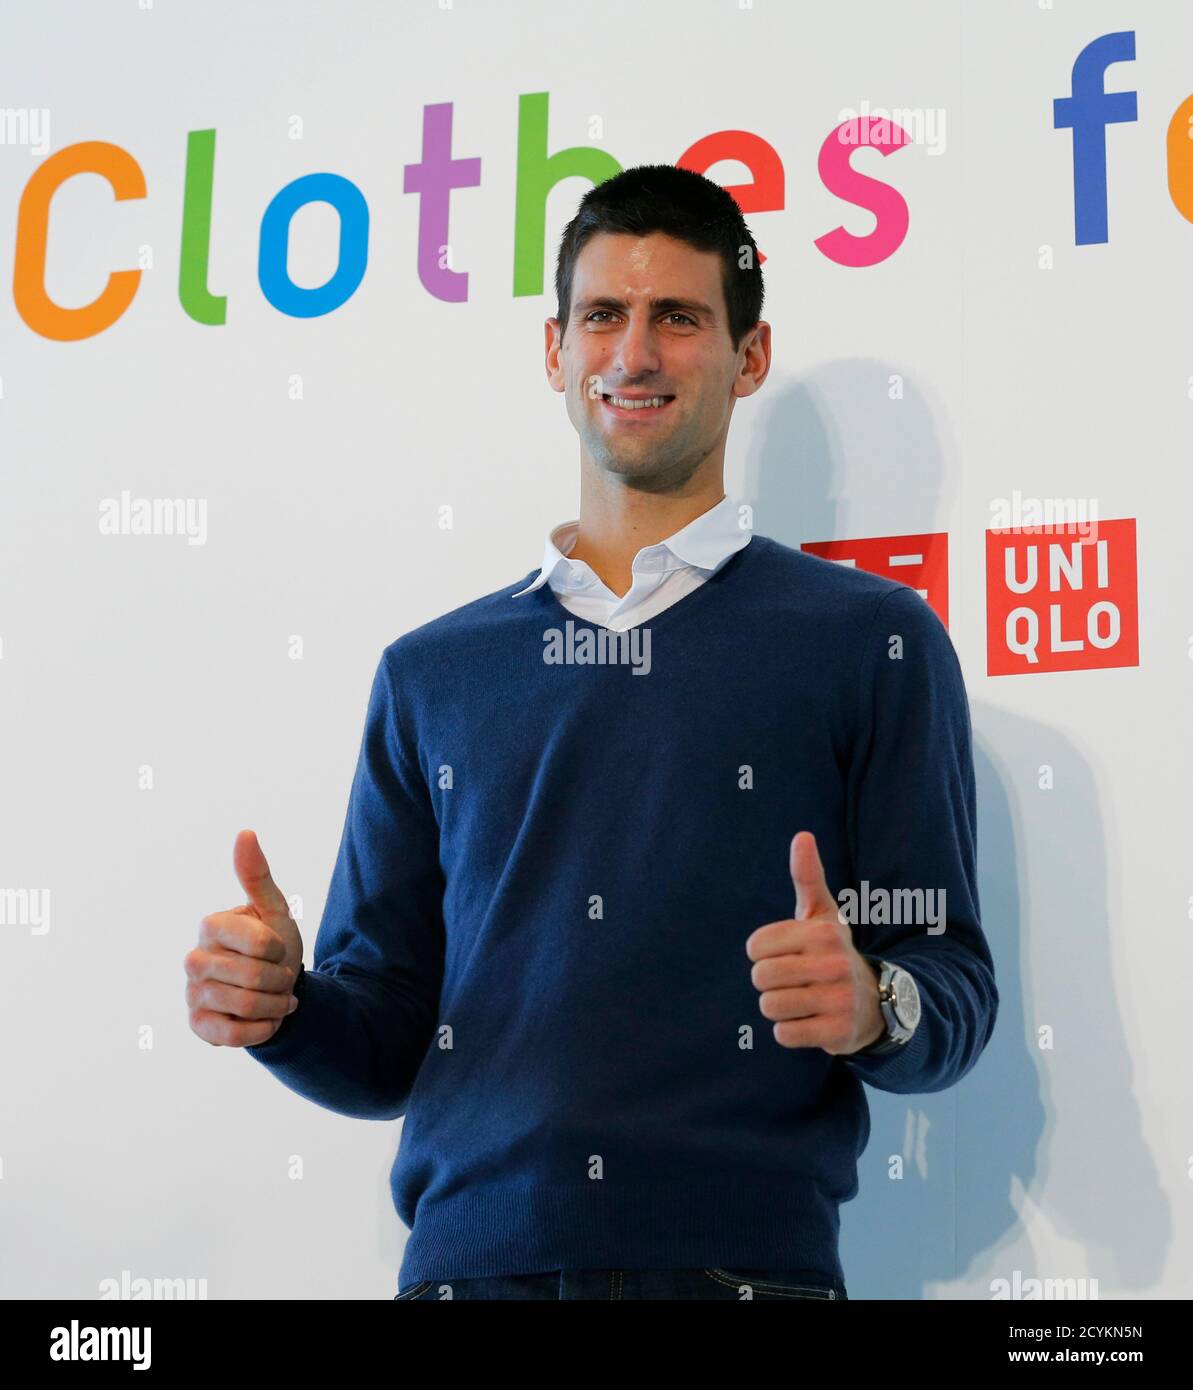 Tennis player and UNIQLO Brand Ambassador Novak Djokovic of Serbia poses  during a news conference announcing the launch of 